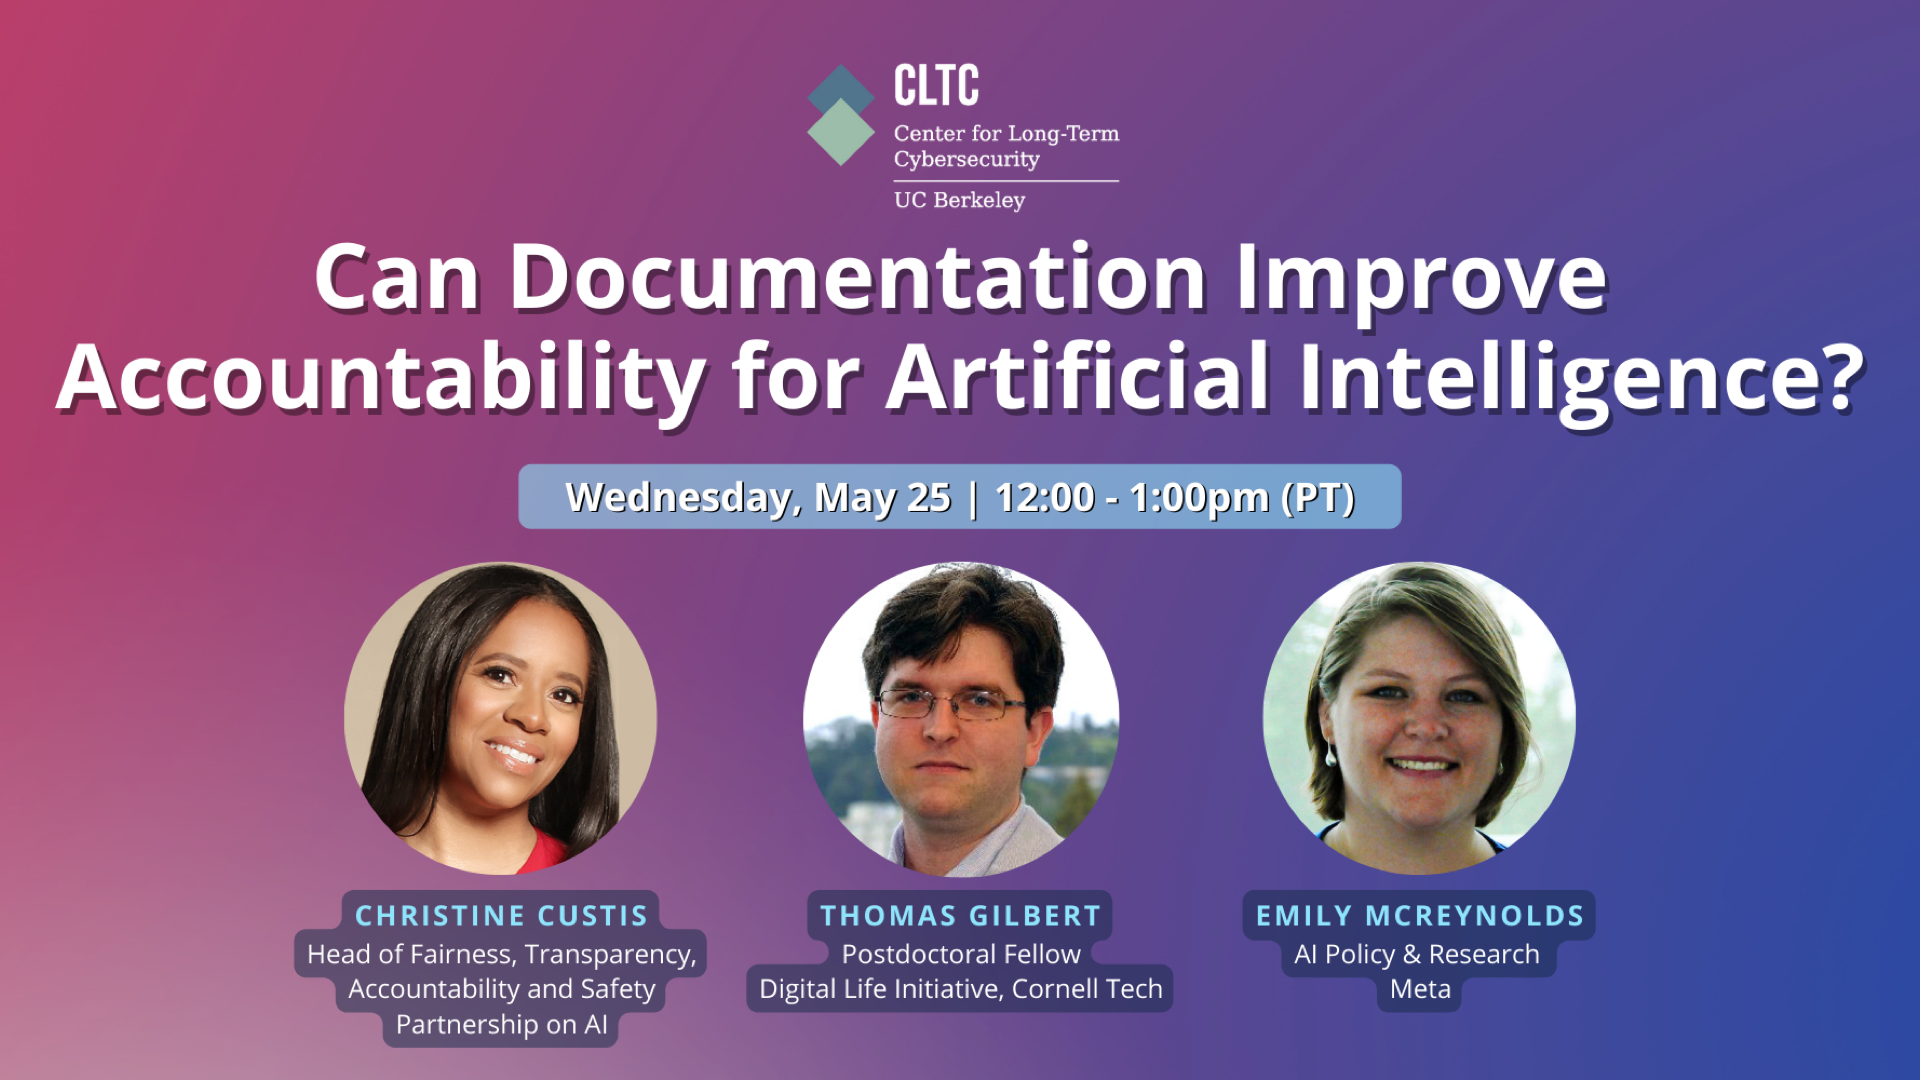 can documentation improve accountability for artificial intelligence